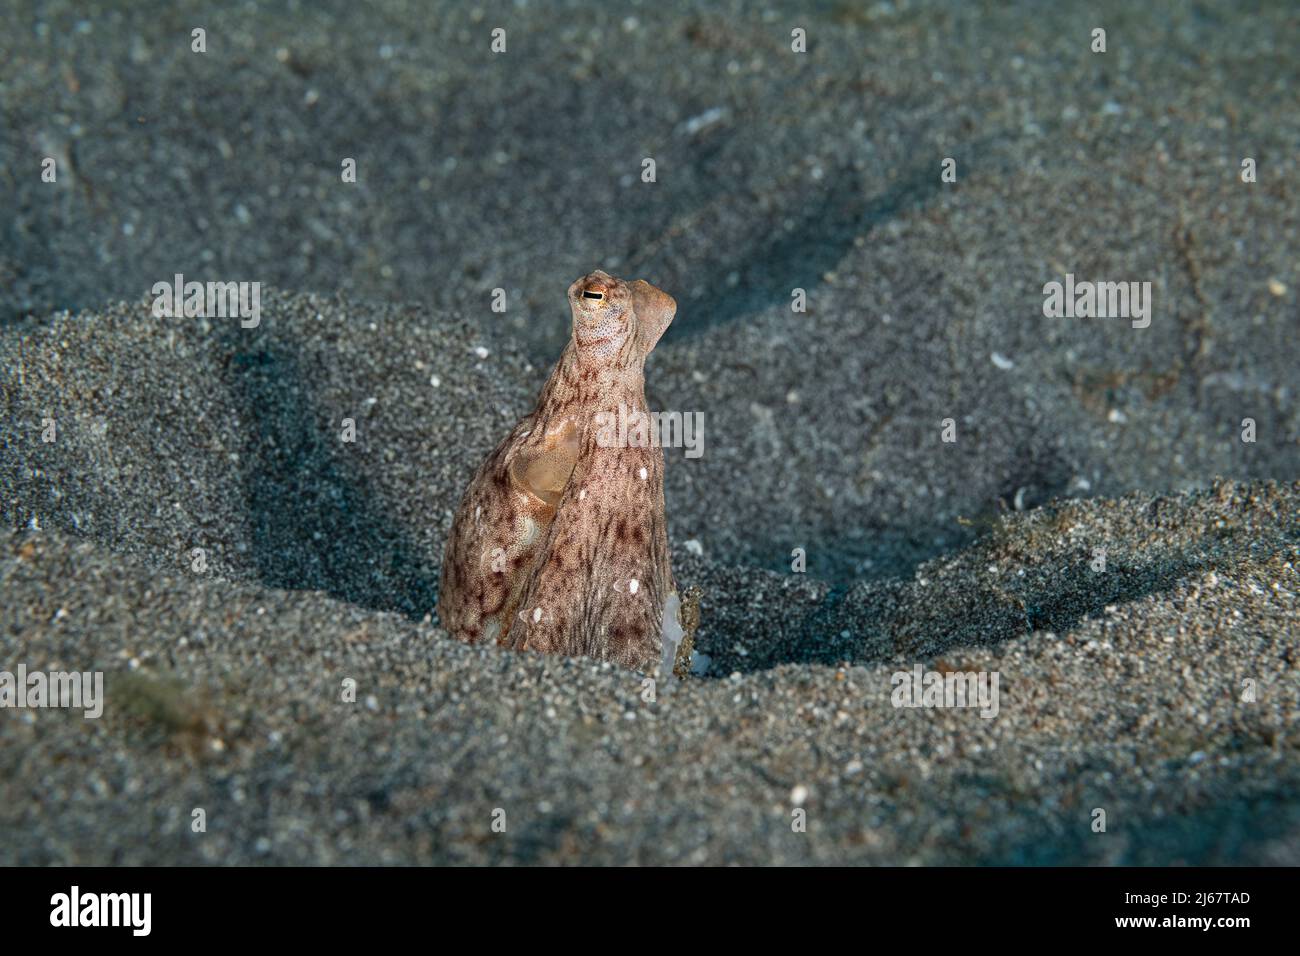 Hawaiian long-armed sand octopus, Thaumoctopus, Abdopus, or Macrotritopus sp., (likely an undescribed endemic species), peering out from burrow, Kona Stock Photo